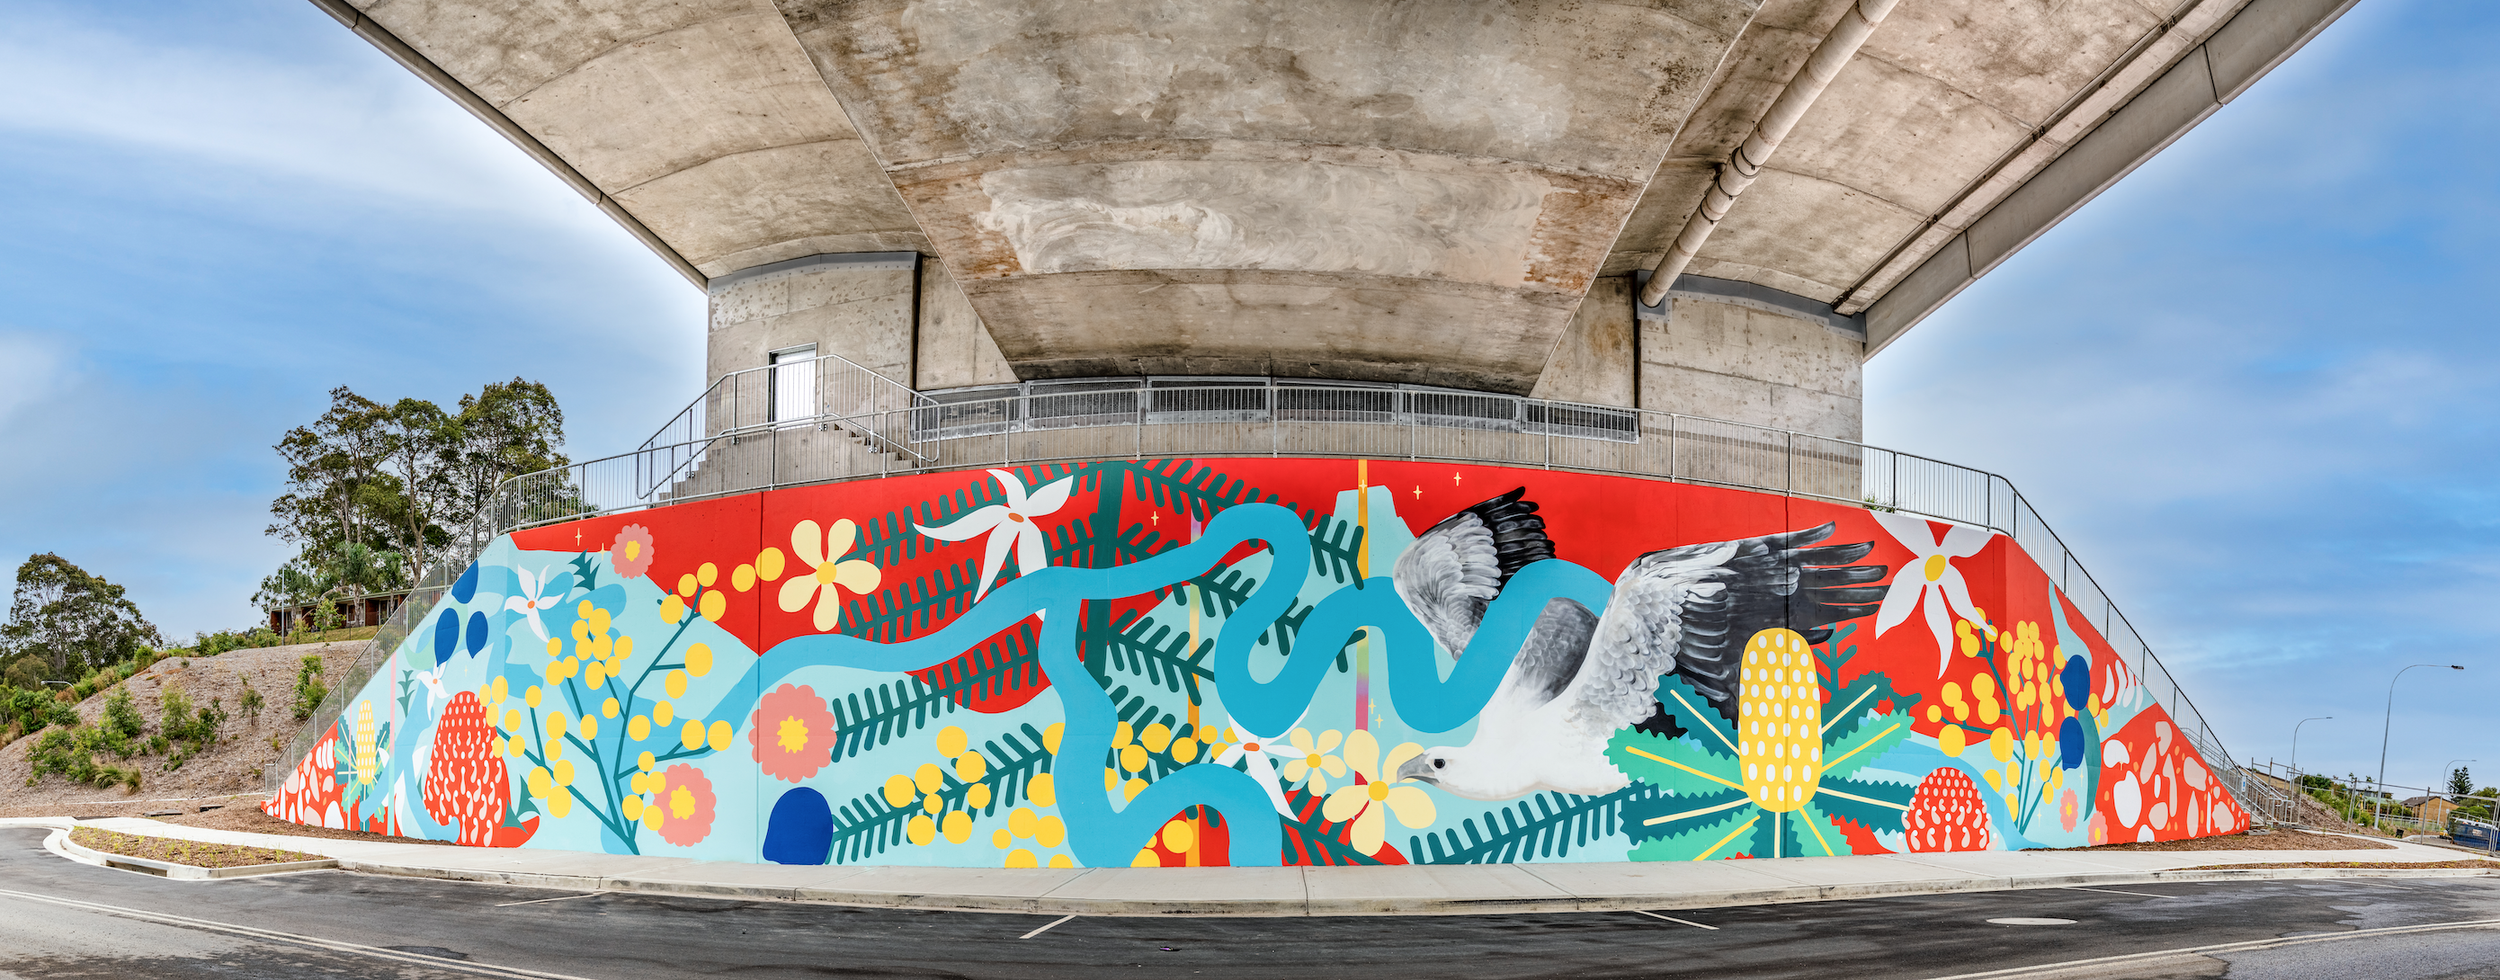 large-mural-nsw-australia-chulo.png